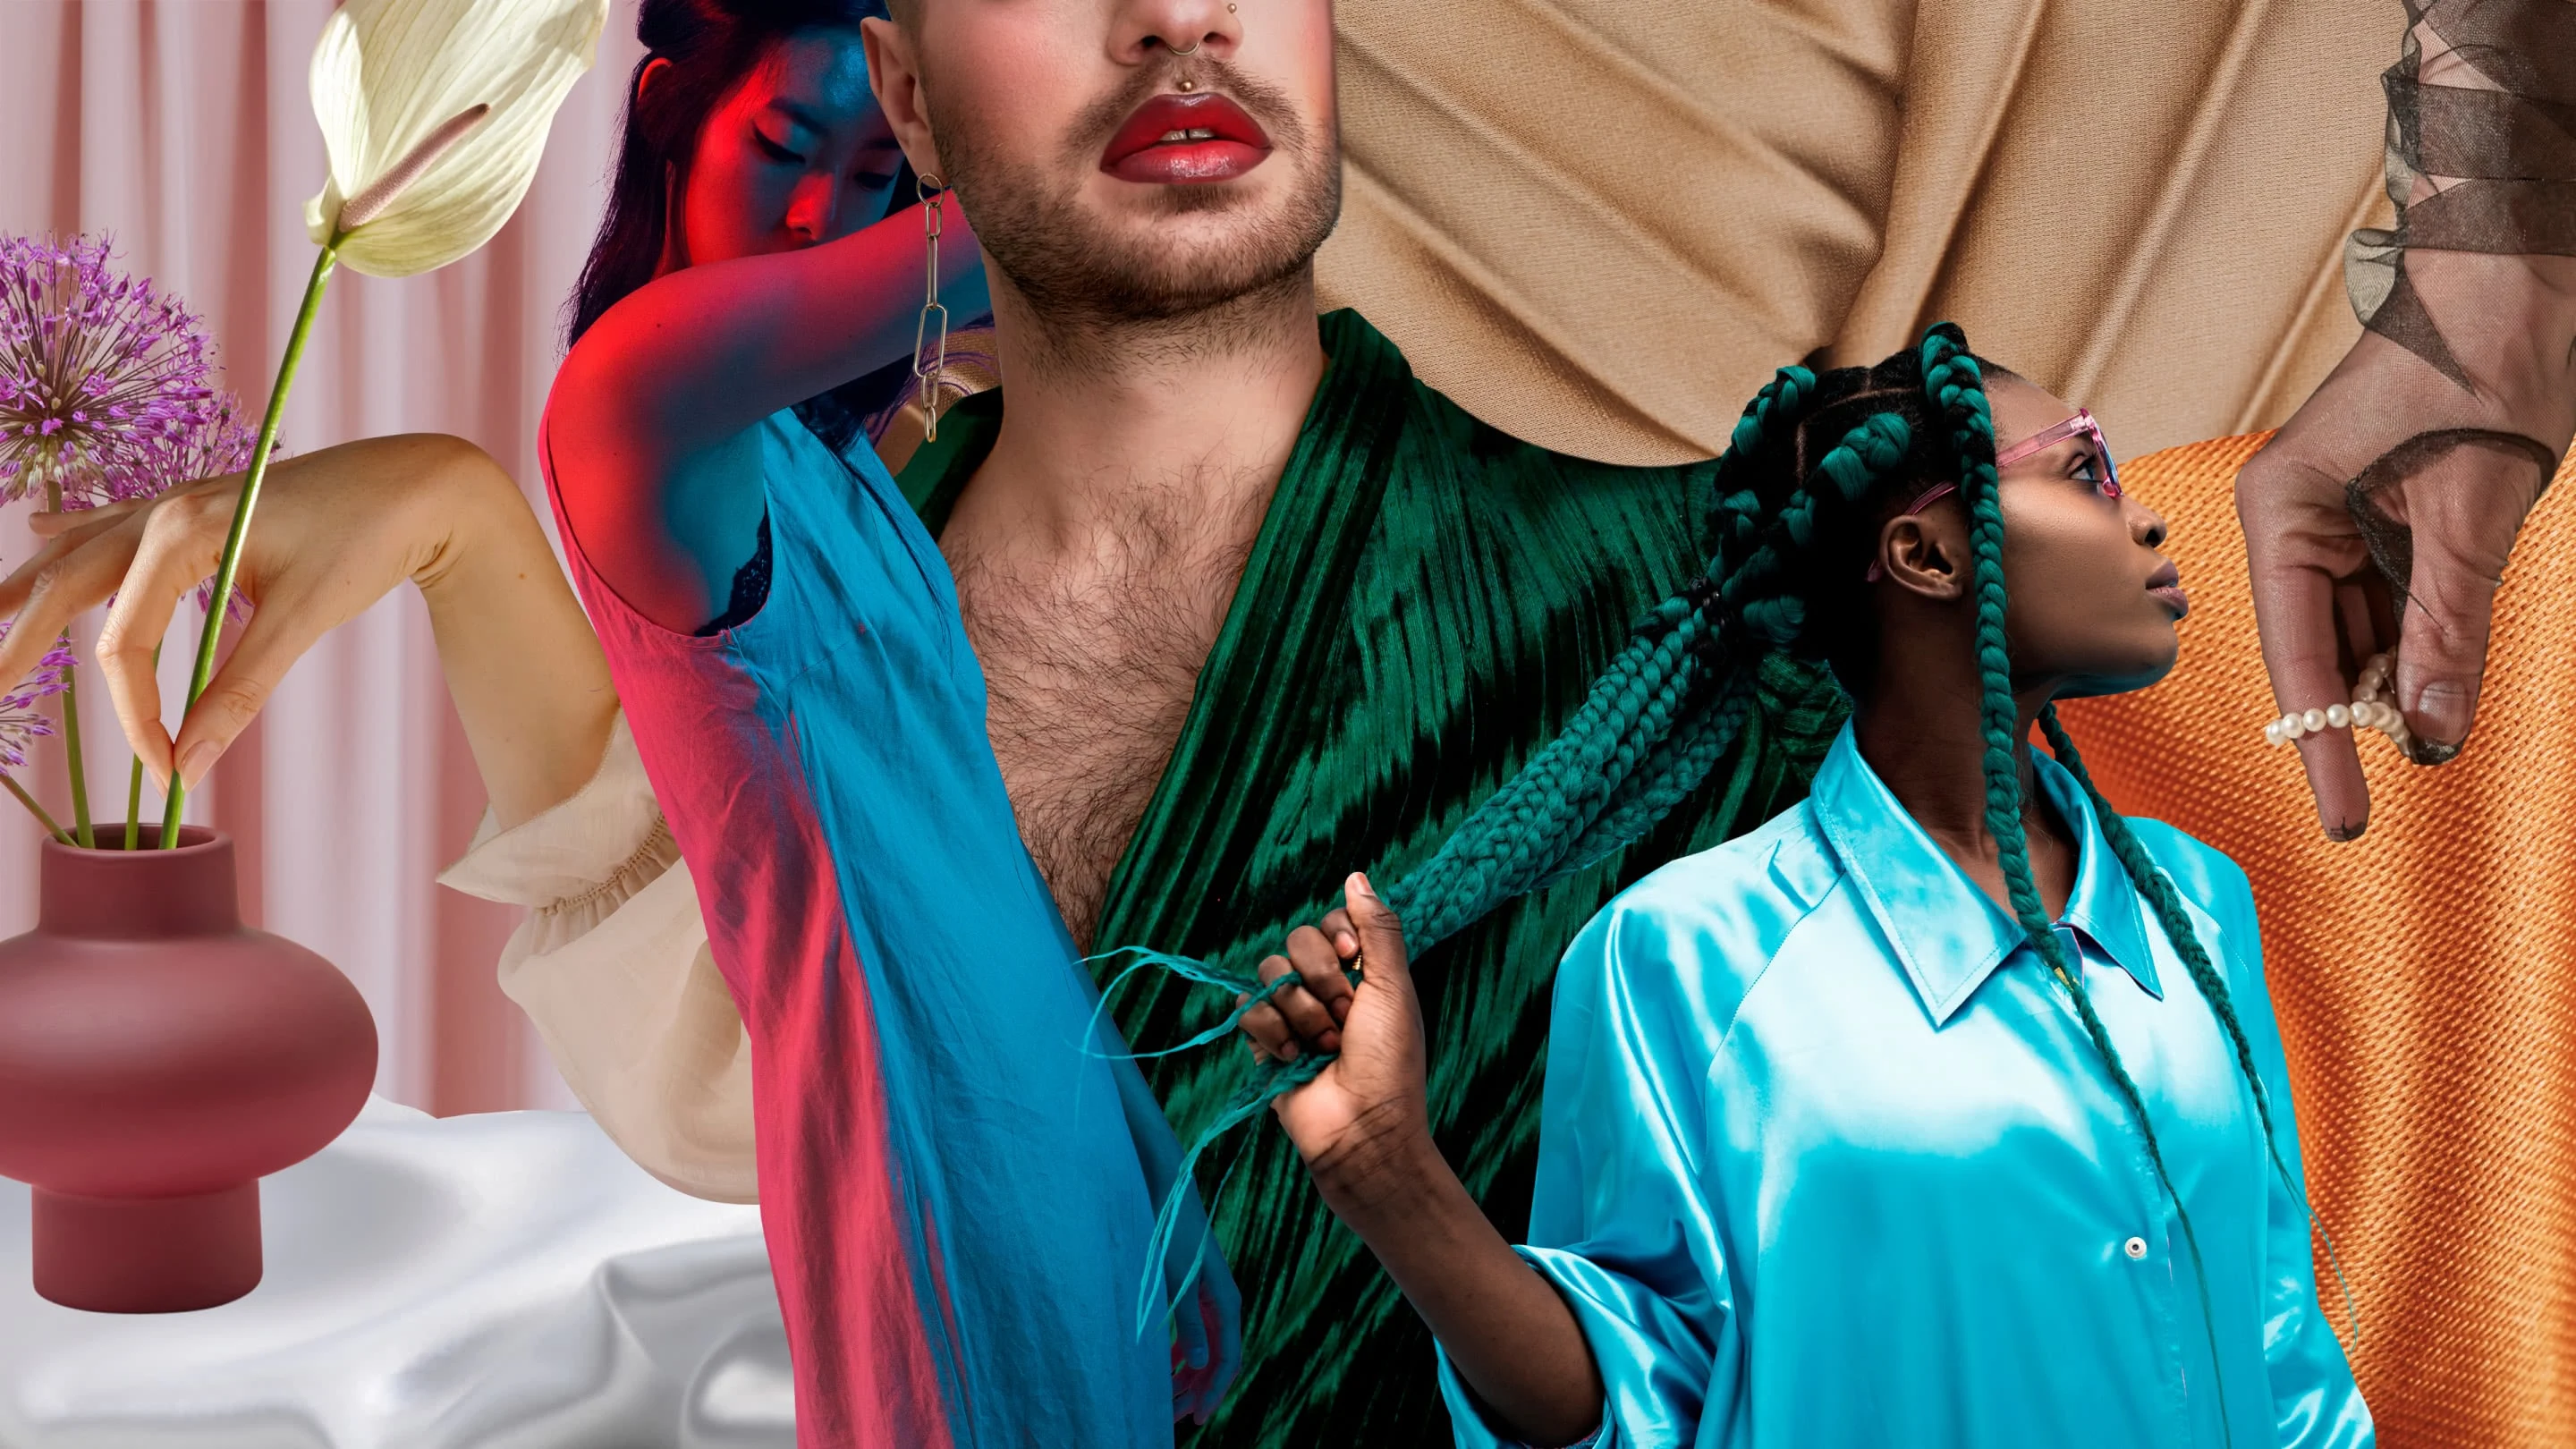 Collage of people wearing silky clothes. Hand of a white woman putting a lily into a vase. East Asian woman wearing a linen dress. Person with a beard and bright lipstick wearing a green robe. Black woman wearing blue silk pajamas.